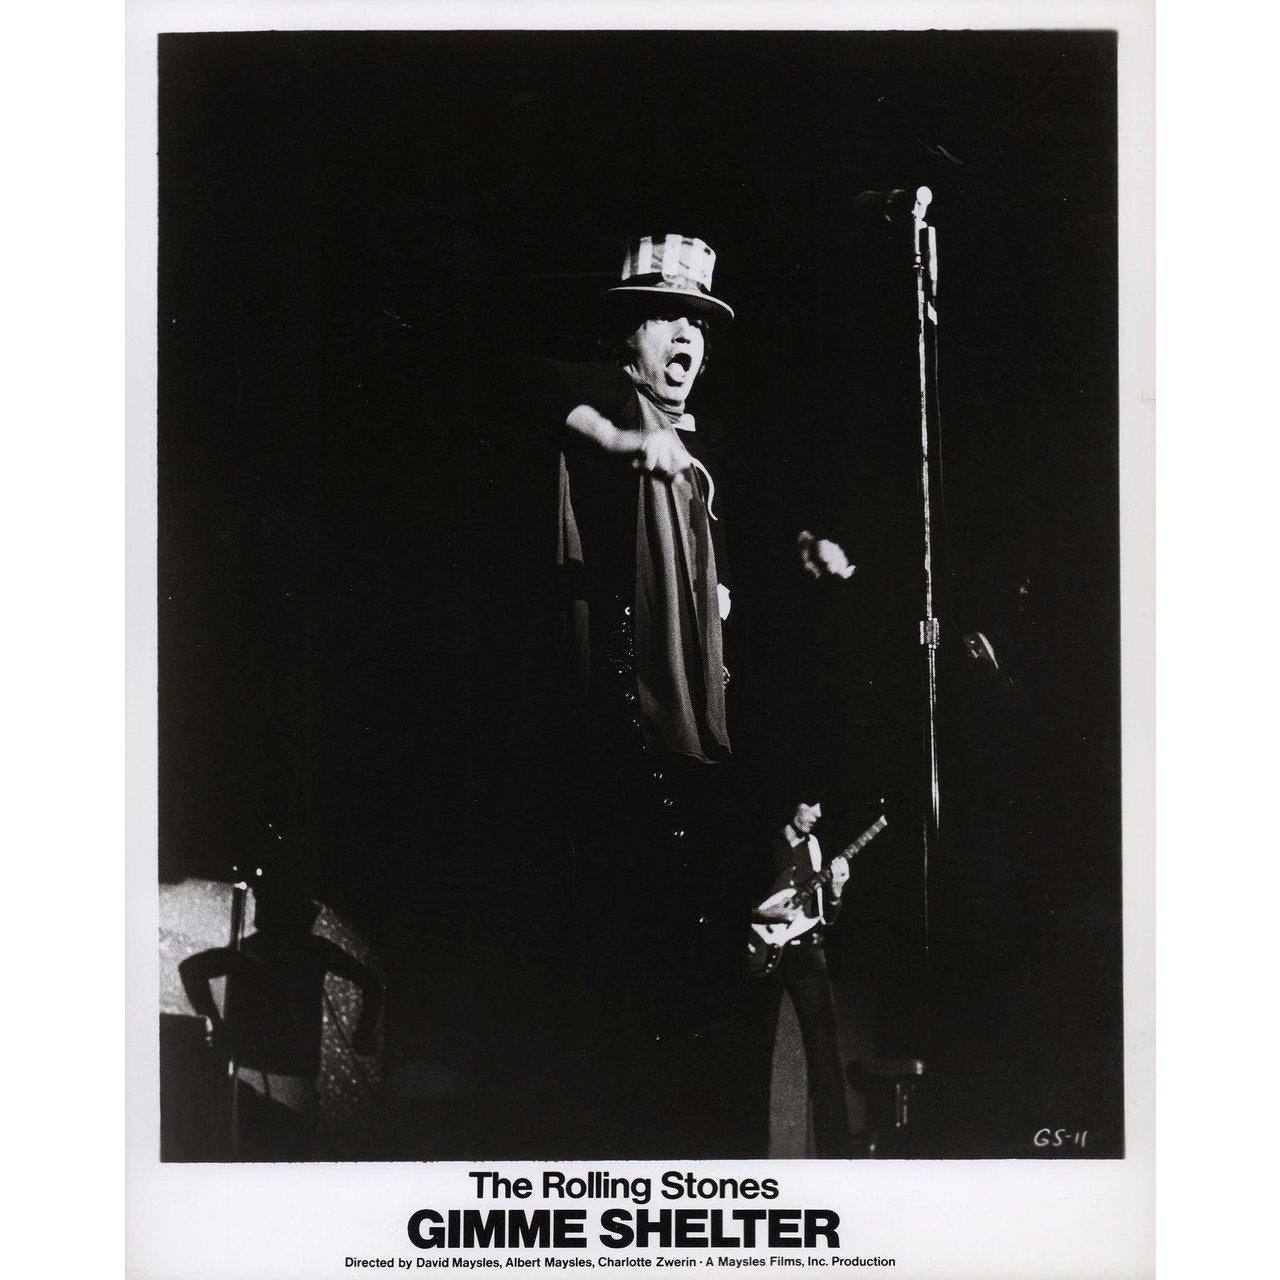 Original 1971 U.S. silver gelatin single-weight photo for the documentary film Gimme Shelter directed by Albert Maysles / David Maysles / Charlotte Zwerin with The Rolling Stones / Mick Jagger / Charlie Watts / Keith Richards. Fine condition. Please